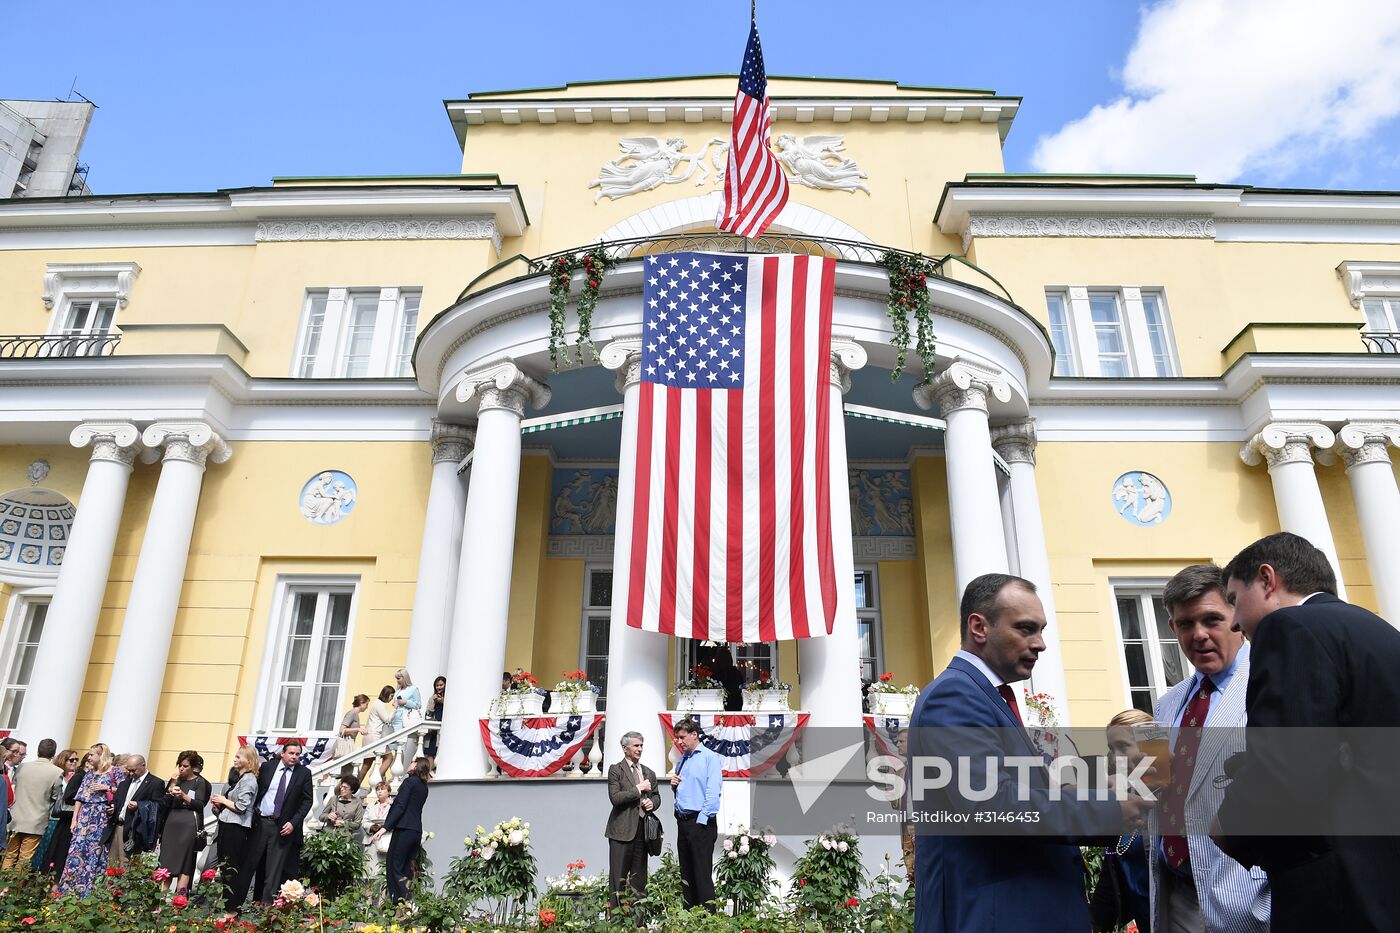 Reception to mark American Independence Day